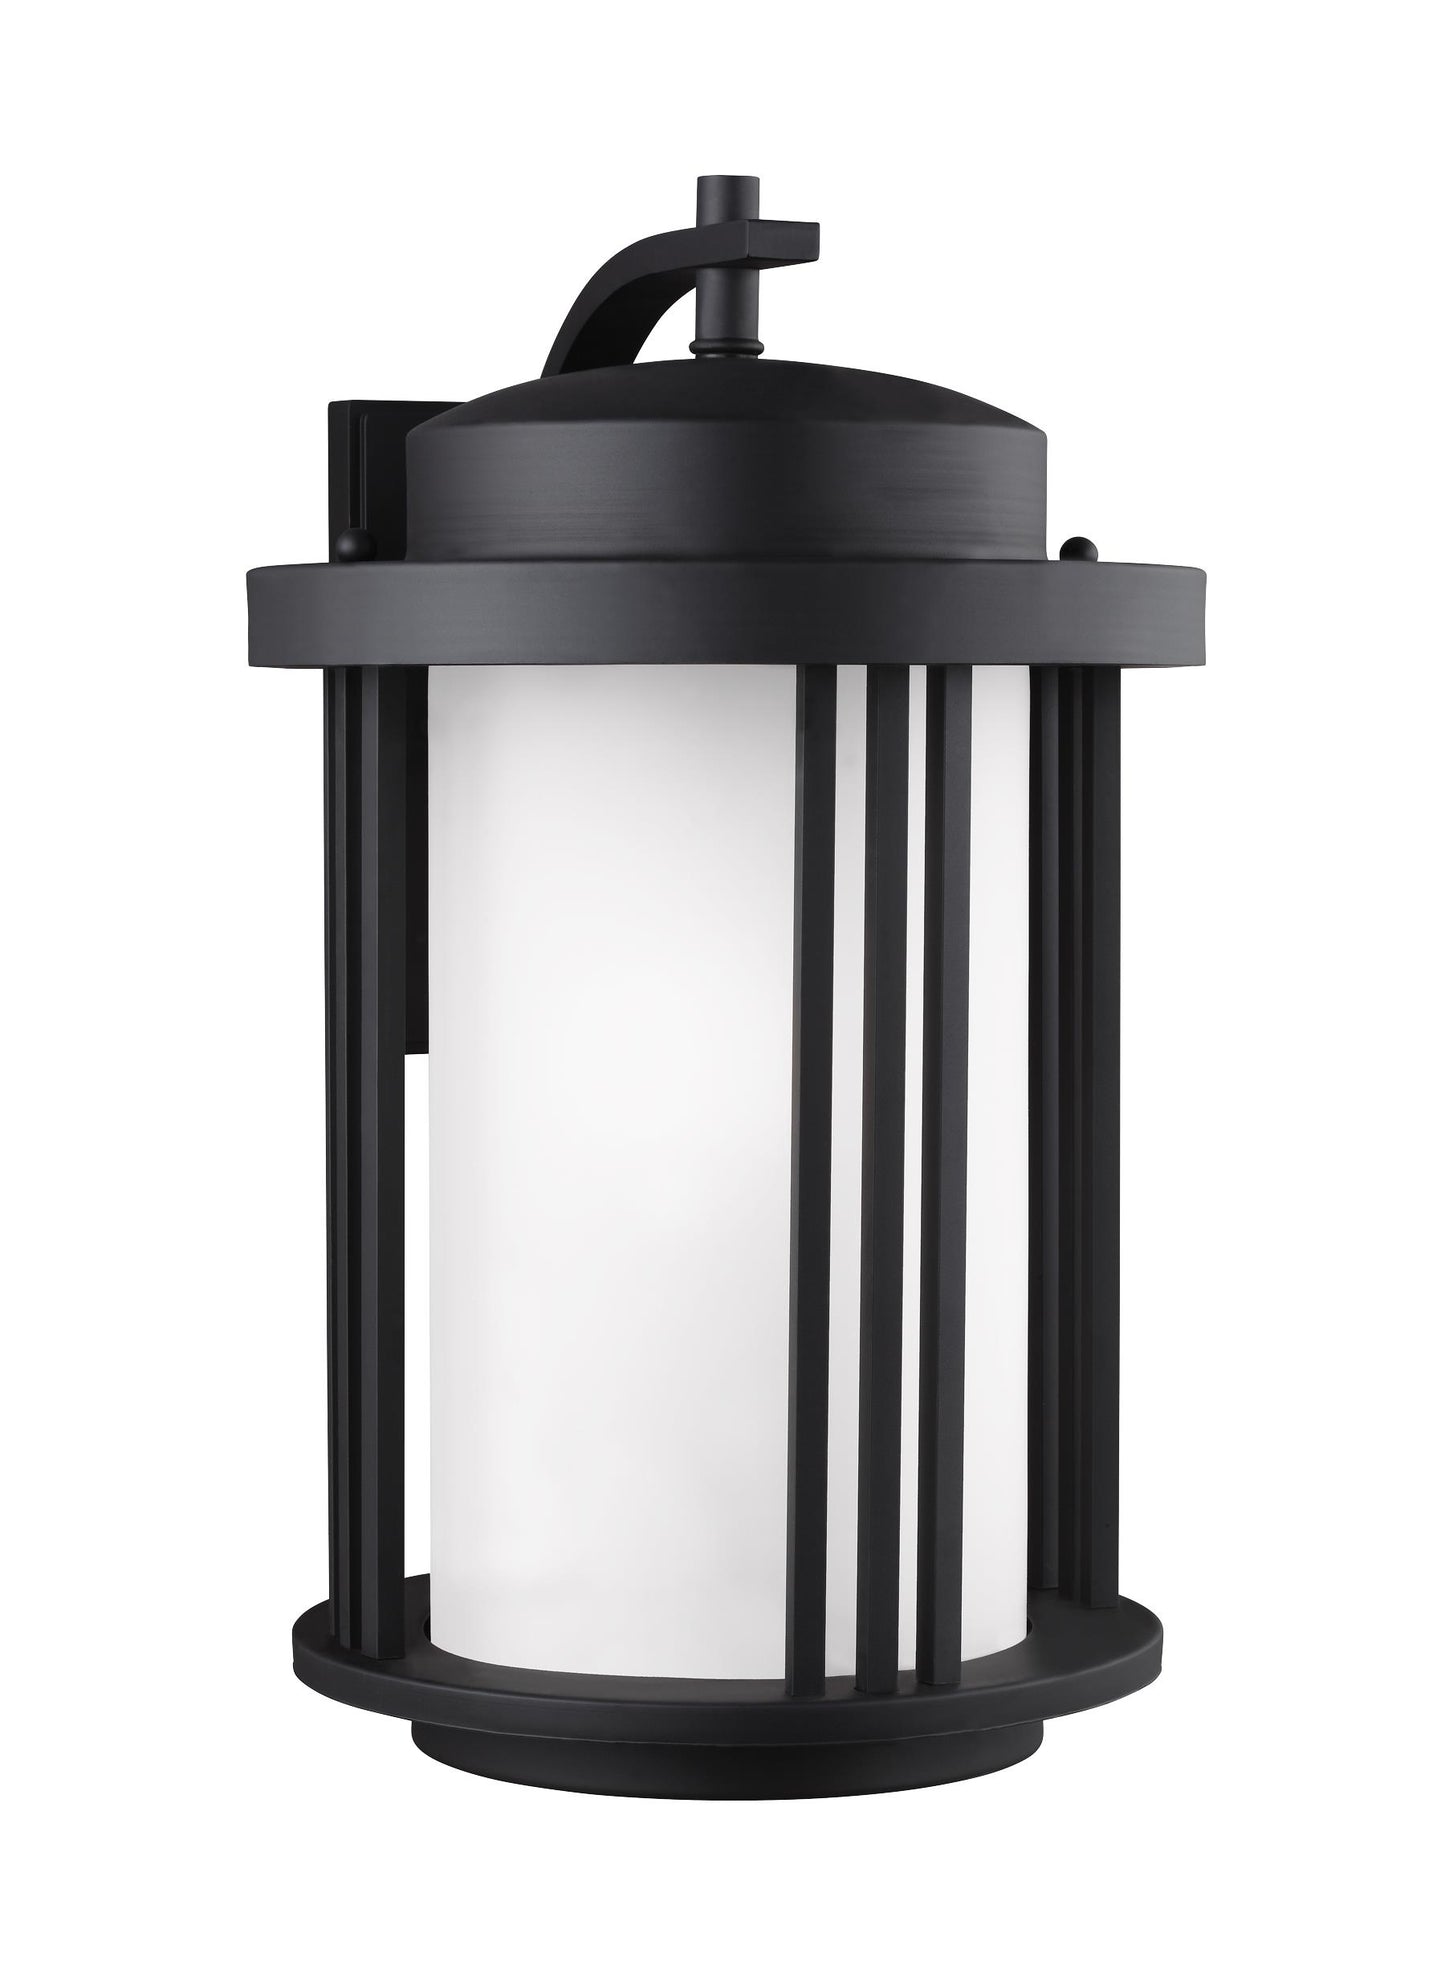 Crowell contemporary 1-light outdoor exterior large wall lantern sconce in black finish with satin etched glass shade